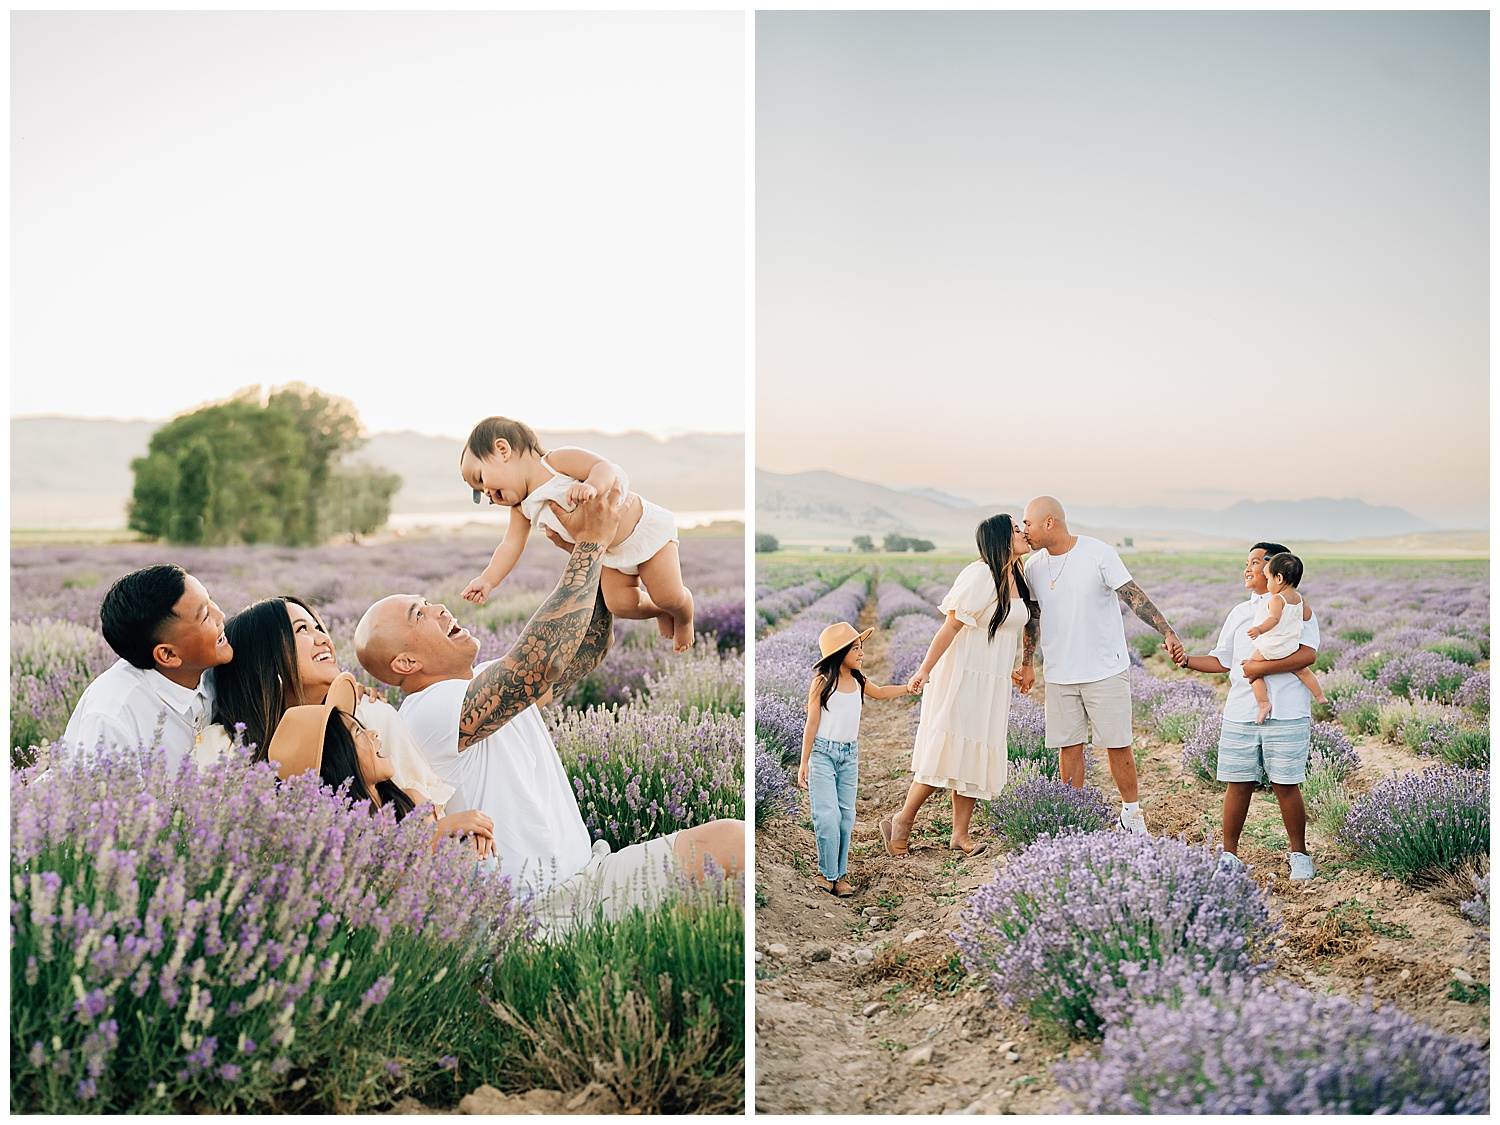 Collage of 2 utah lavender field family pictures, side by side. 